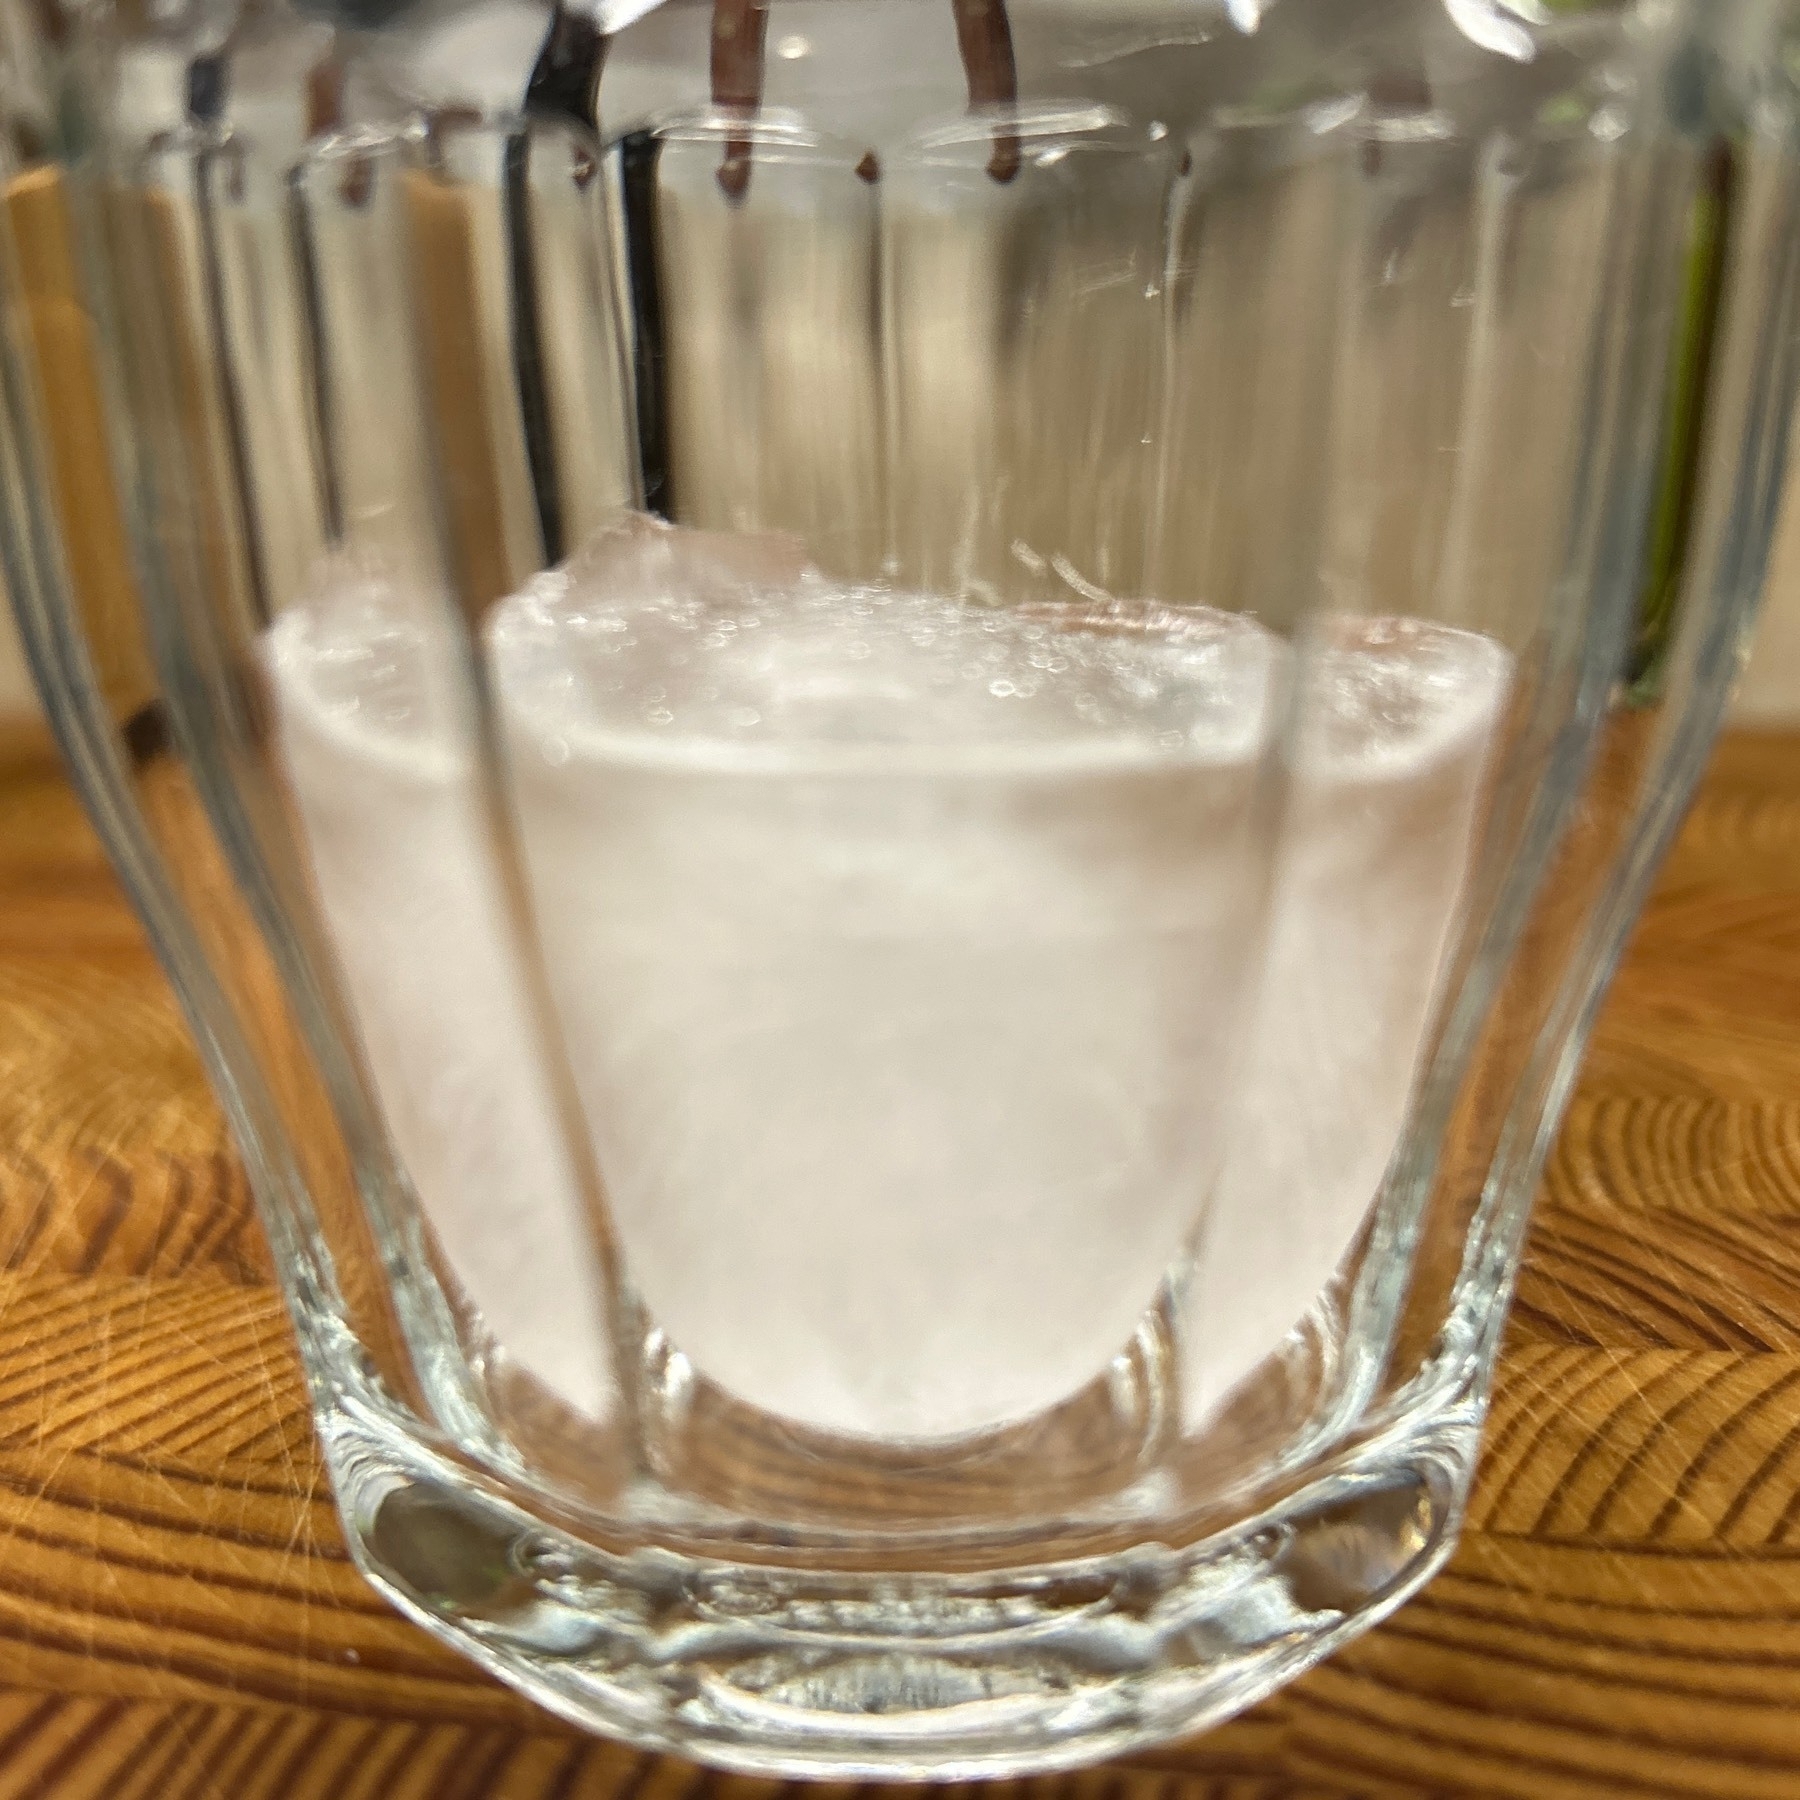 Small glass with round ice cube visible in it. 